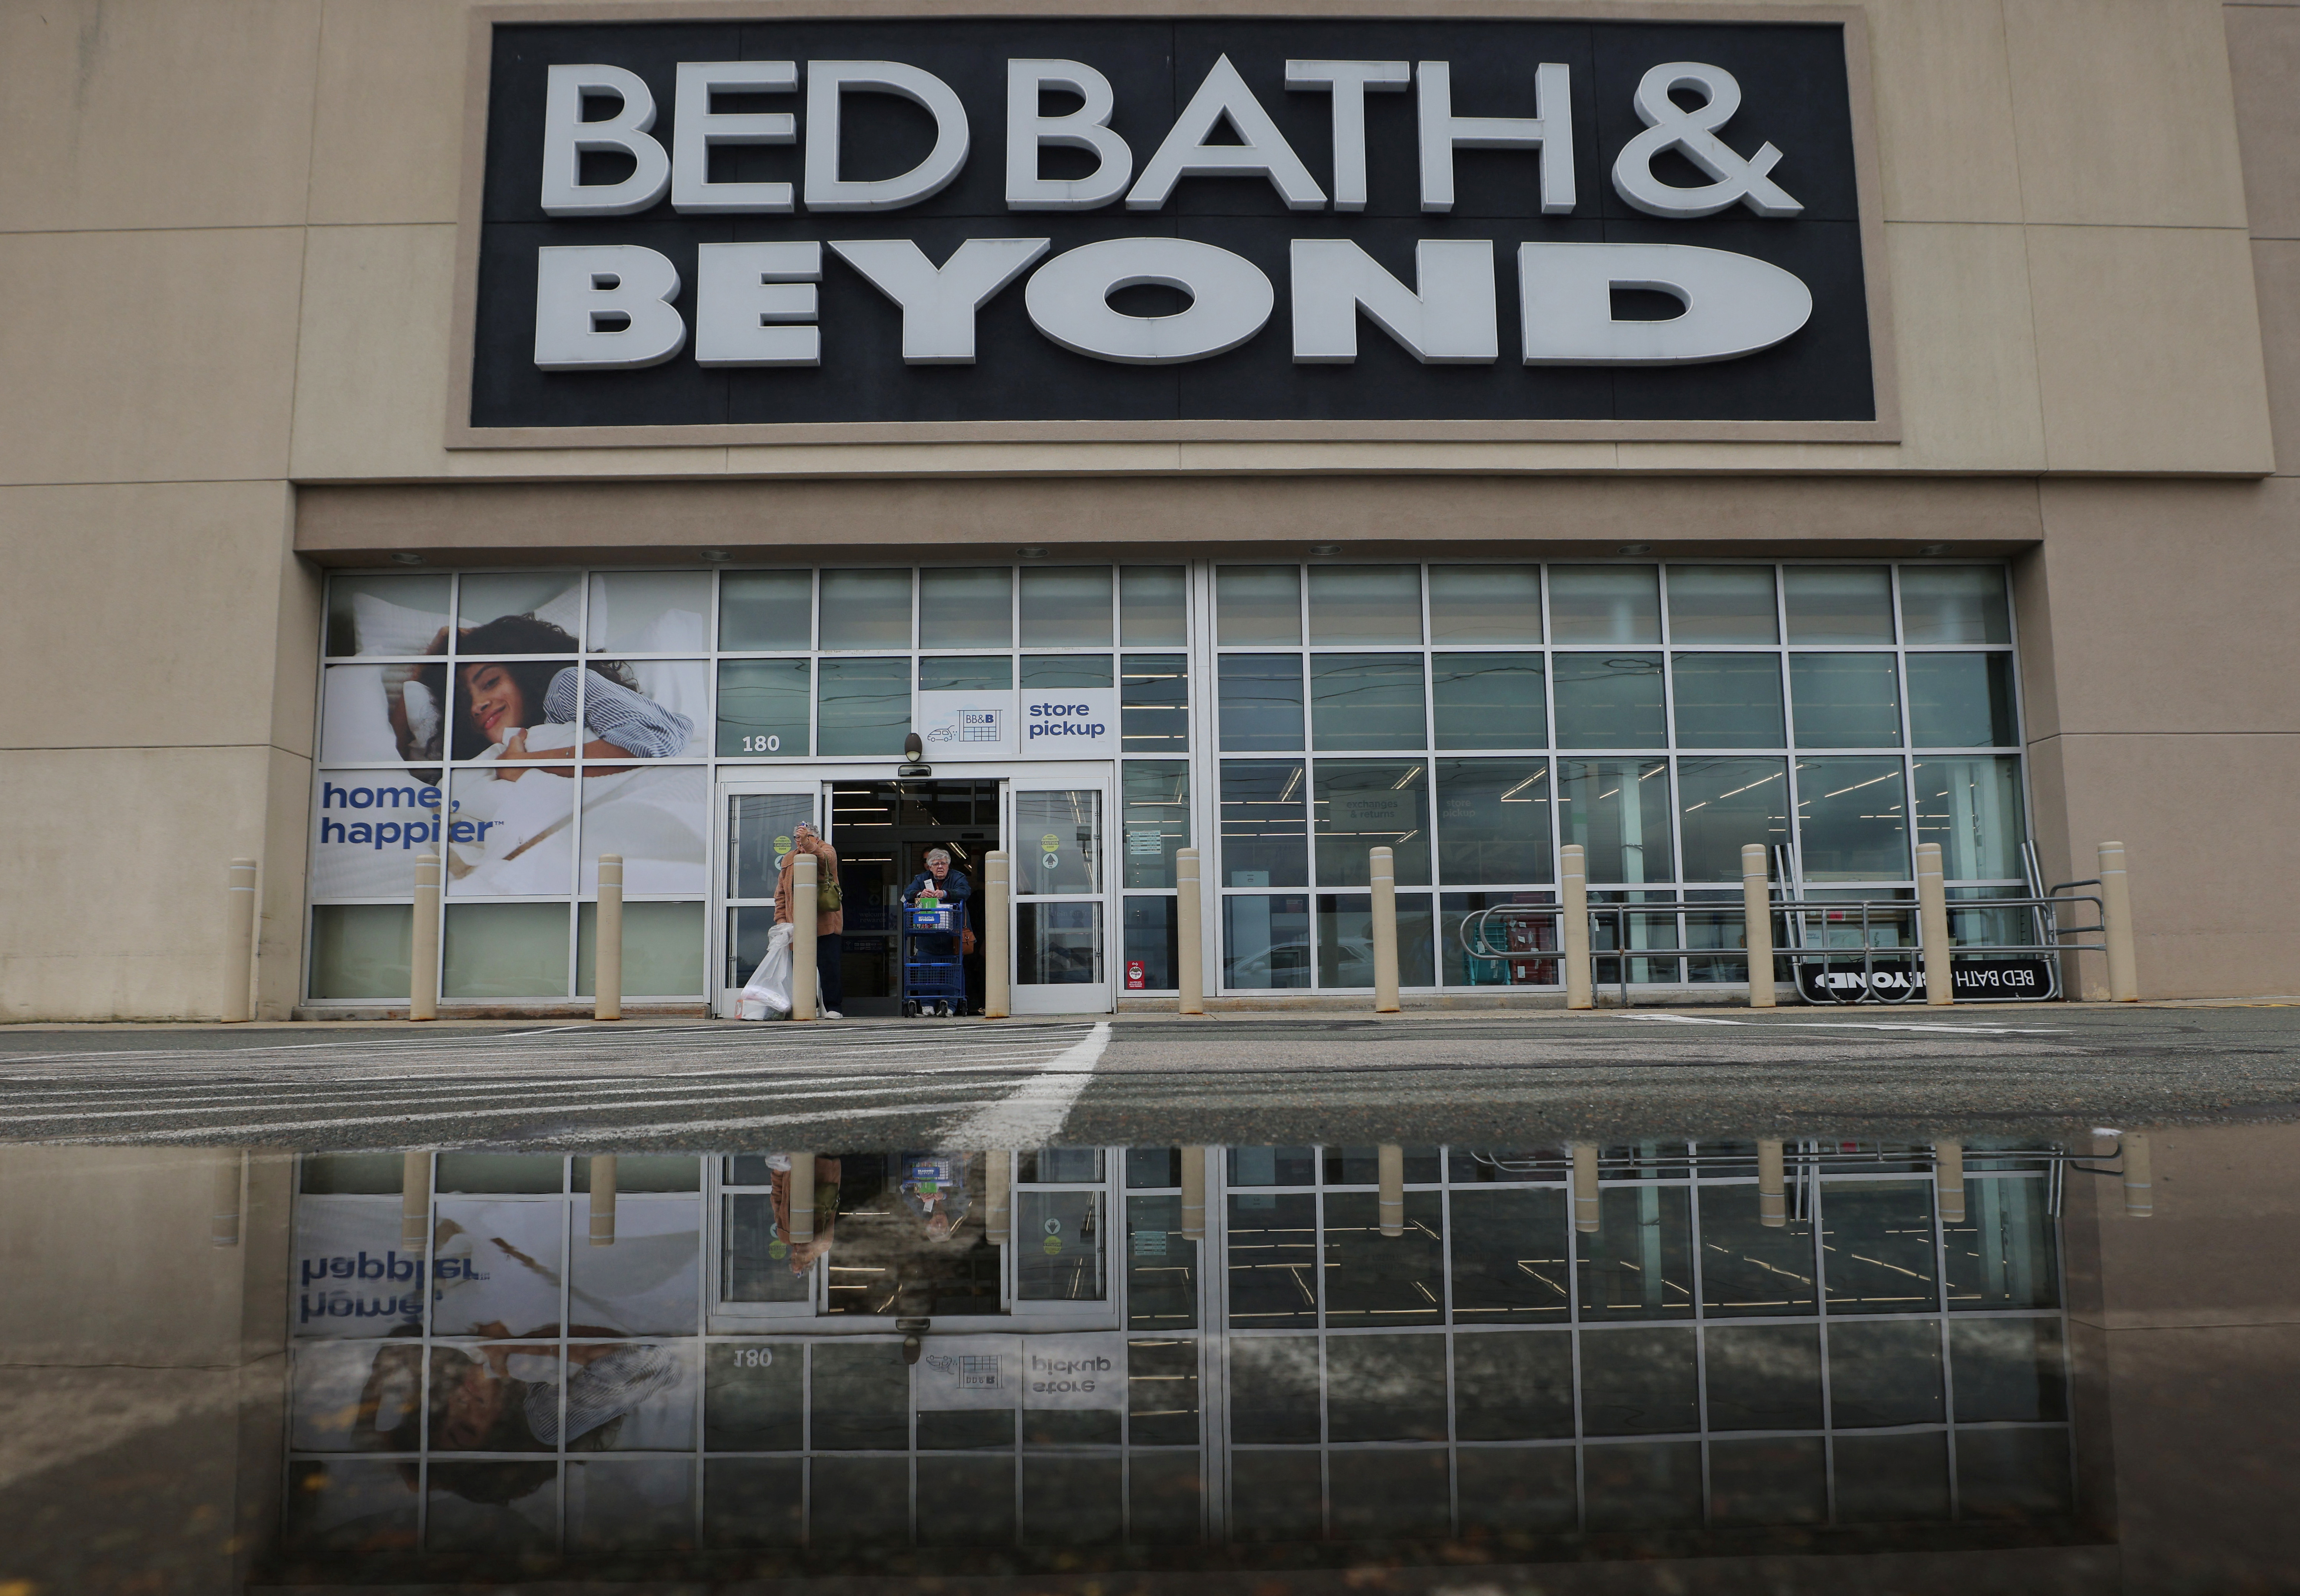 Why Walmart's new bet on fashion brands, home decor threatens